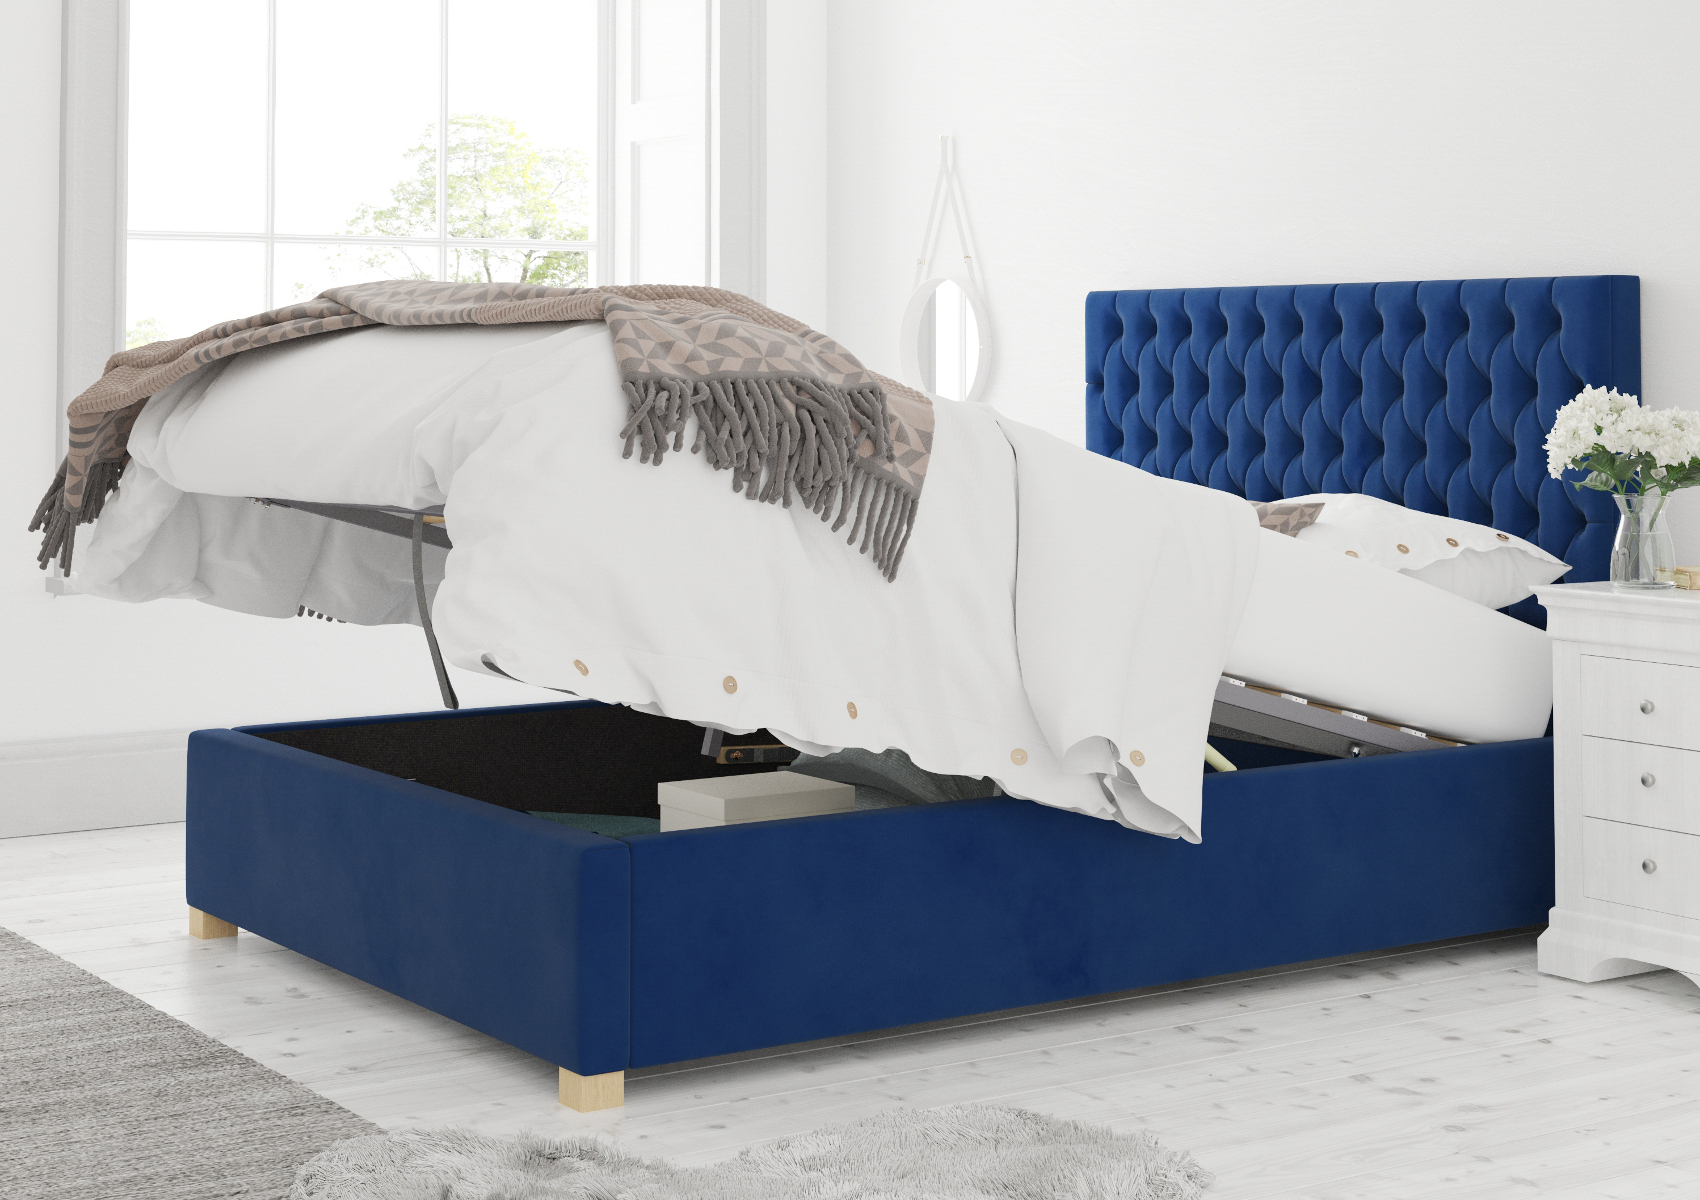 View Malton Navy Upholstered King Size Ottoman Bed Time4Sleep information